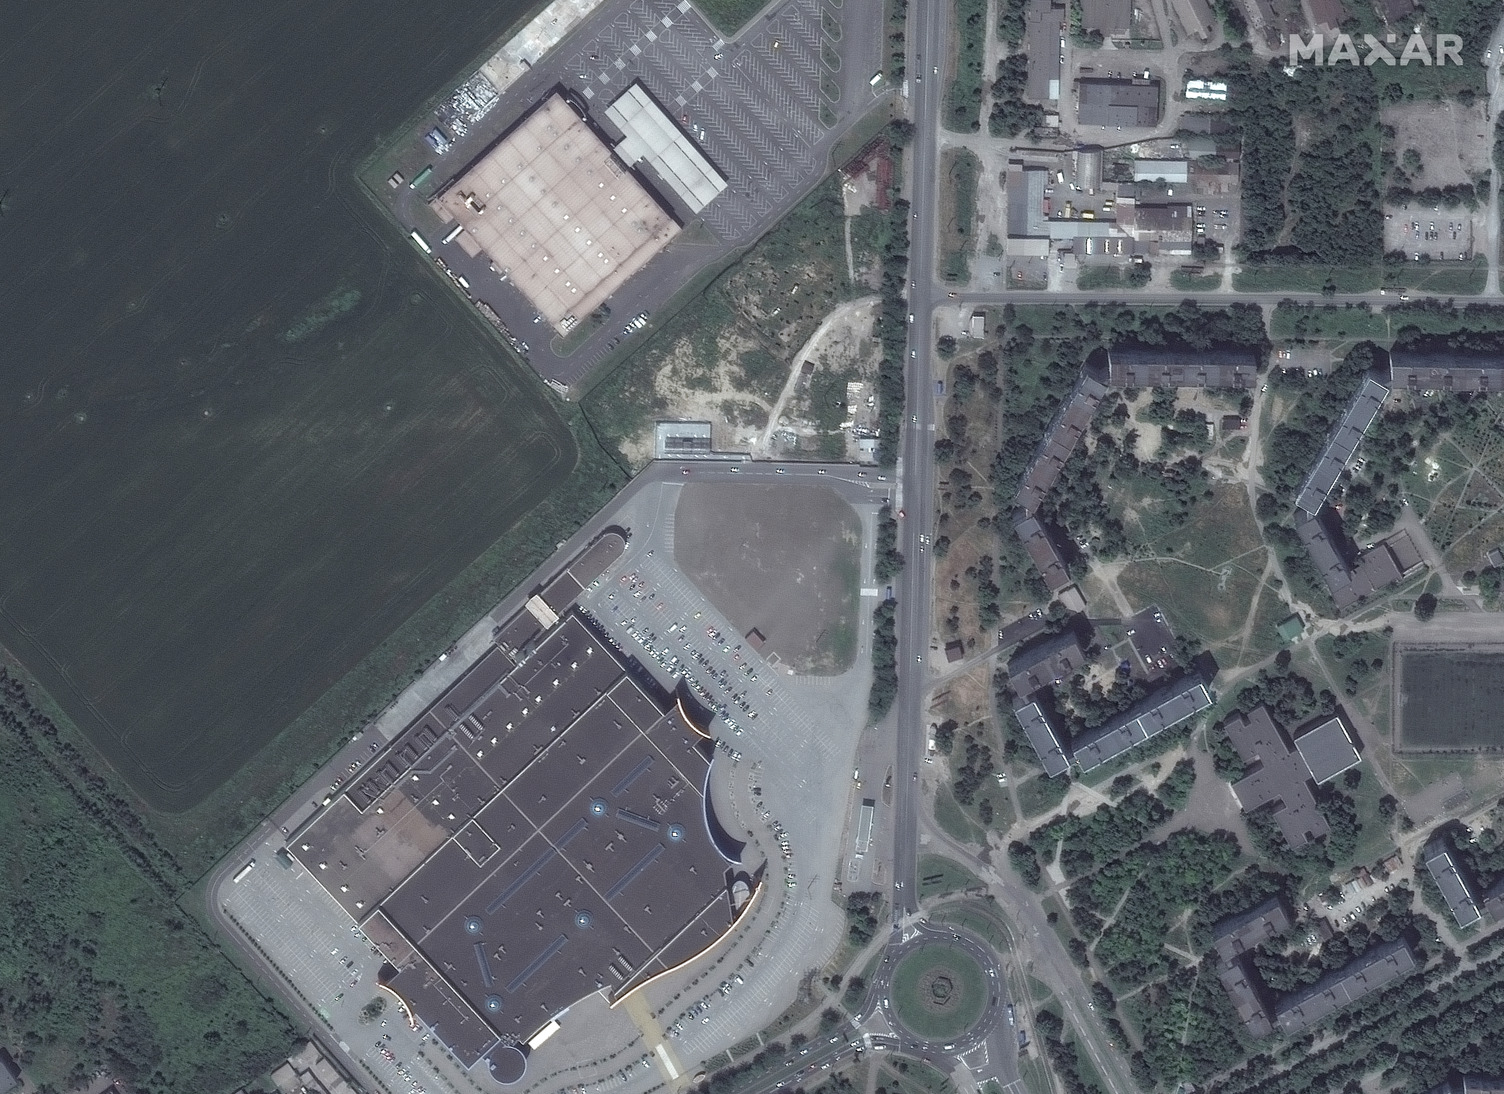 05_portcity shopping mall and other stores_before invasion_western mariupol_ukraine_21june2021_wv2.jpg